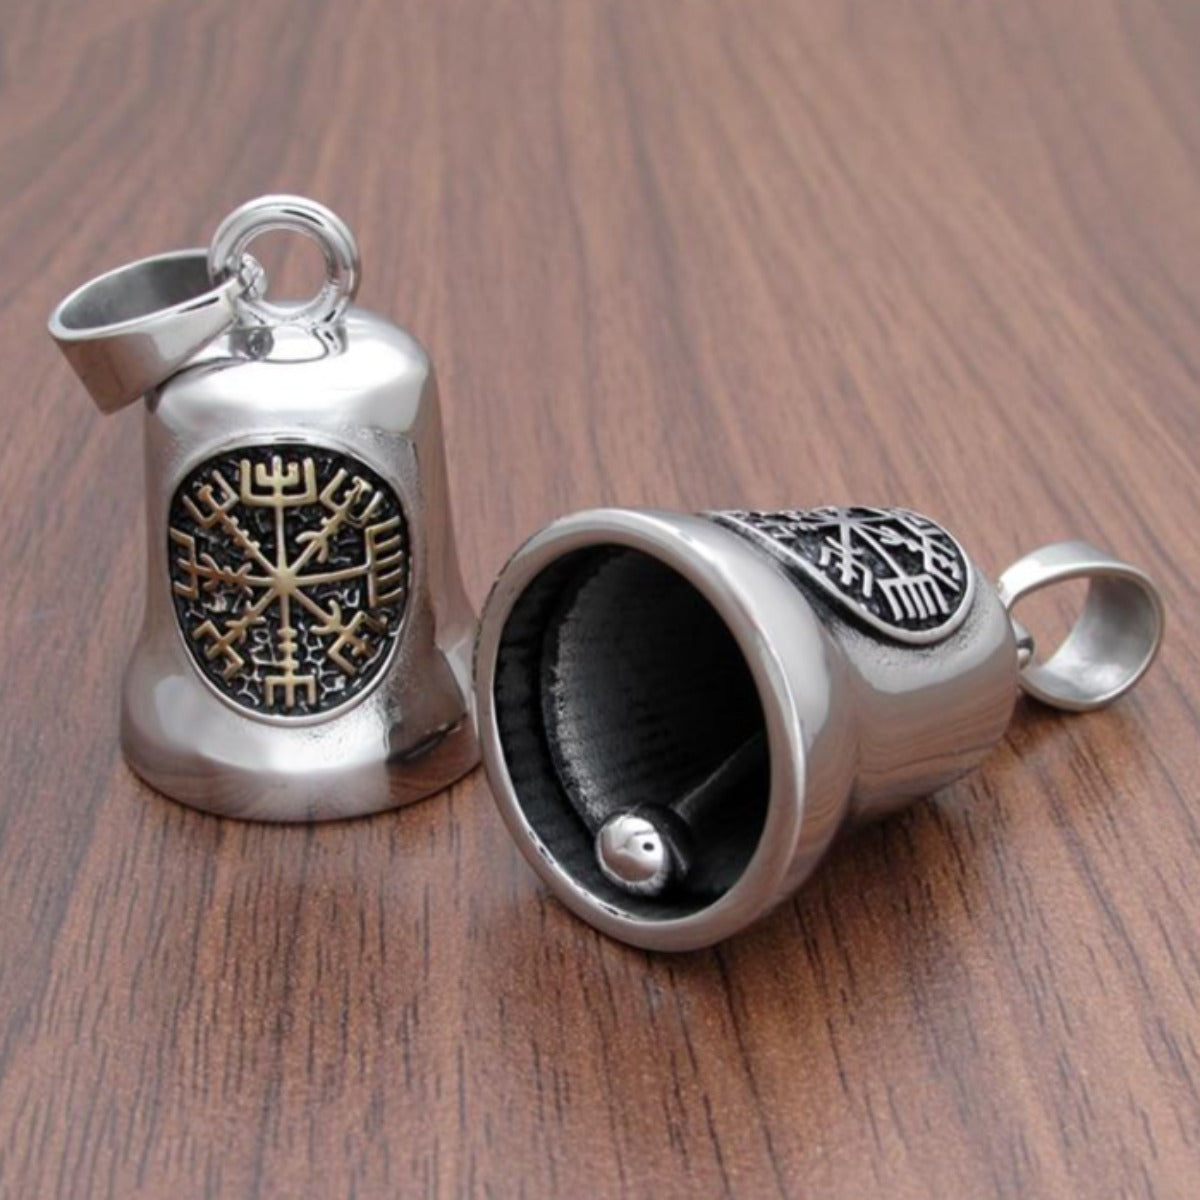 Two Stainless Steel Viking Compass Gremlin Bell pendants with Norse symbols lying on a wooden surface, one open to reveal a hidden compartment.